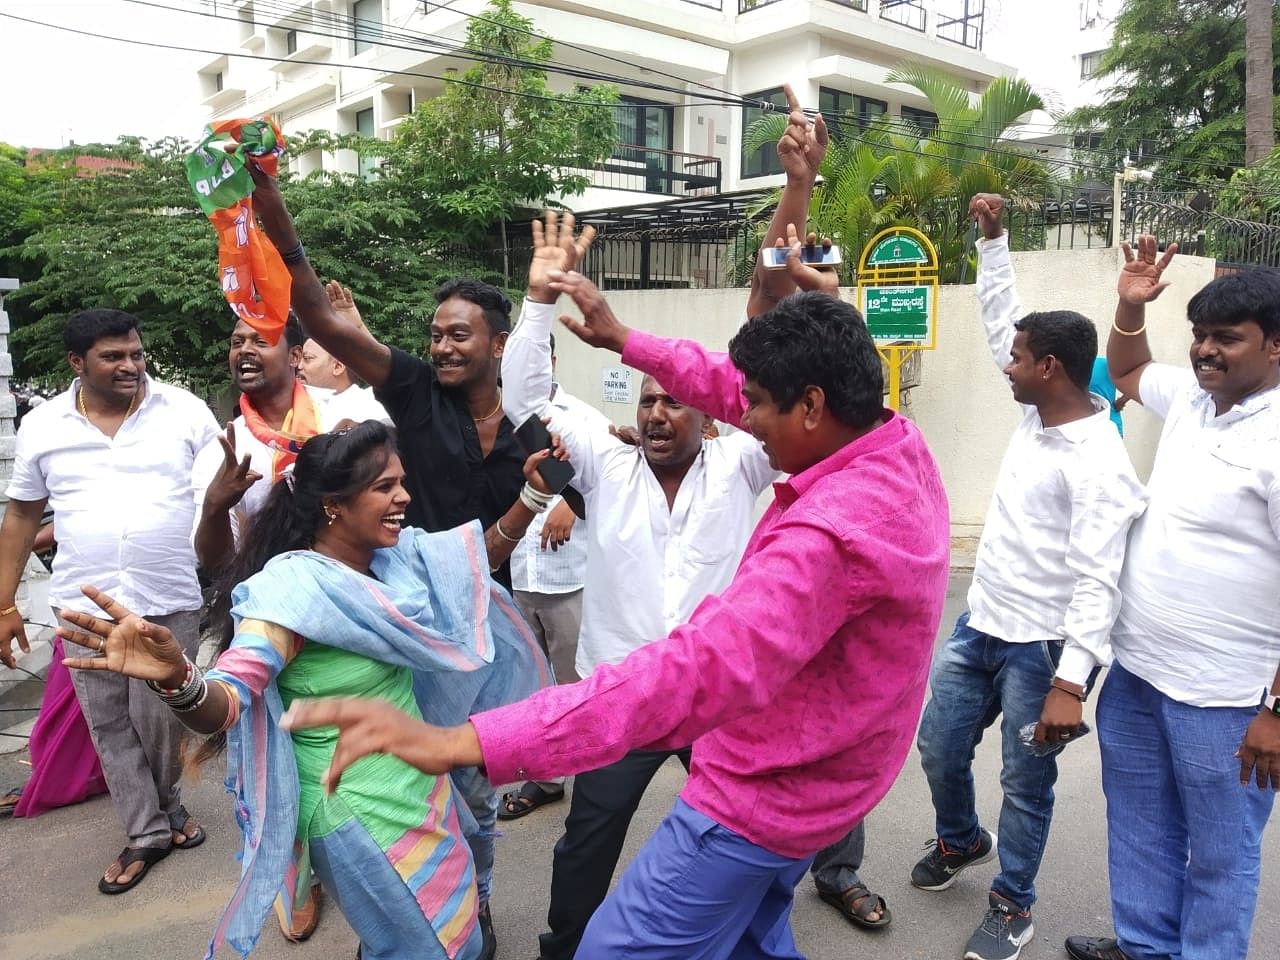 BJP workers broke into dance in front of Mount Carmel College. But such scenes were rare.